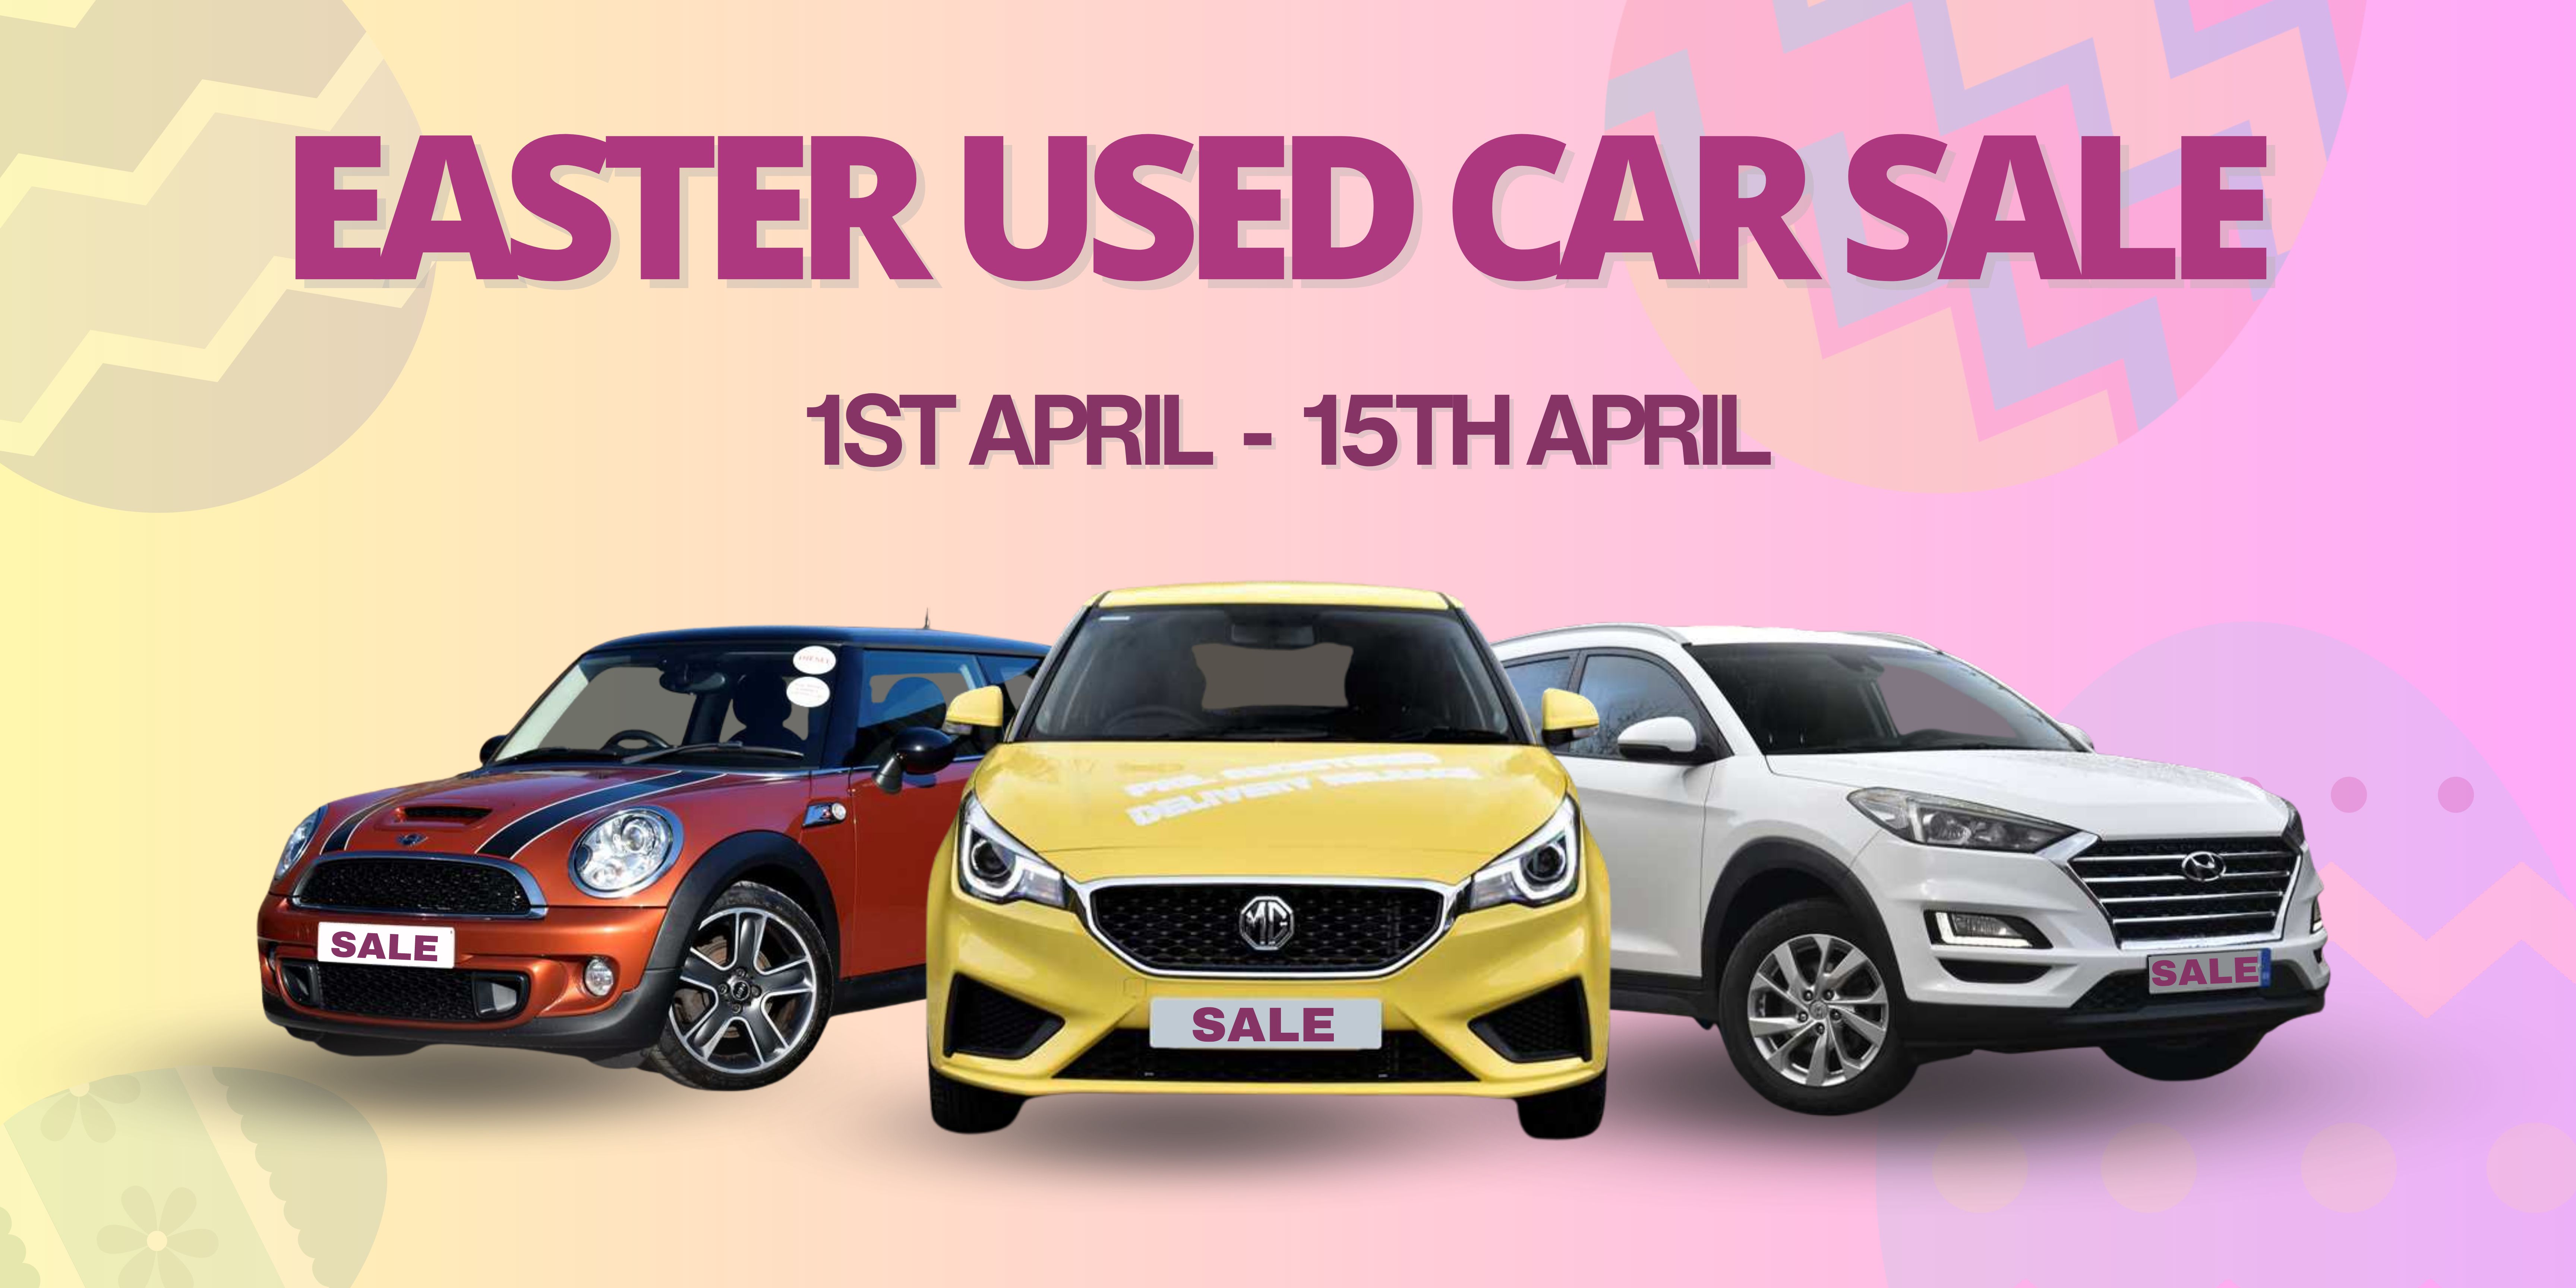 Easter Used Car Sale